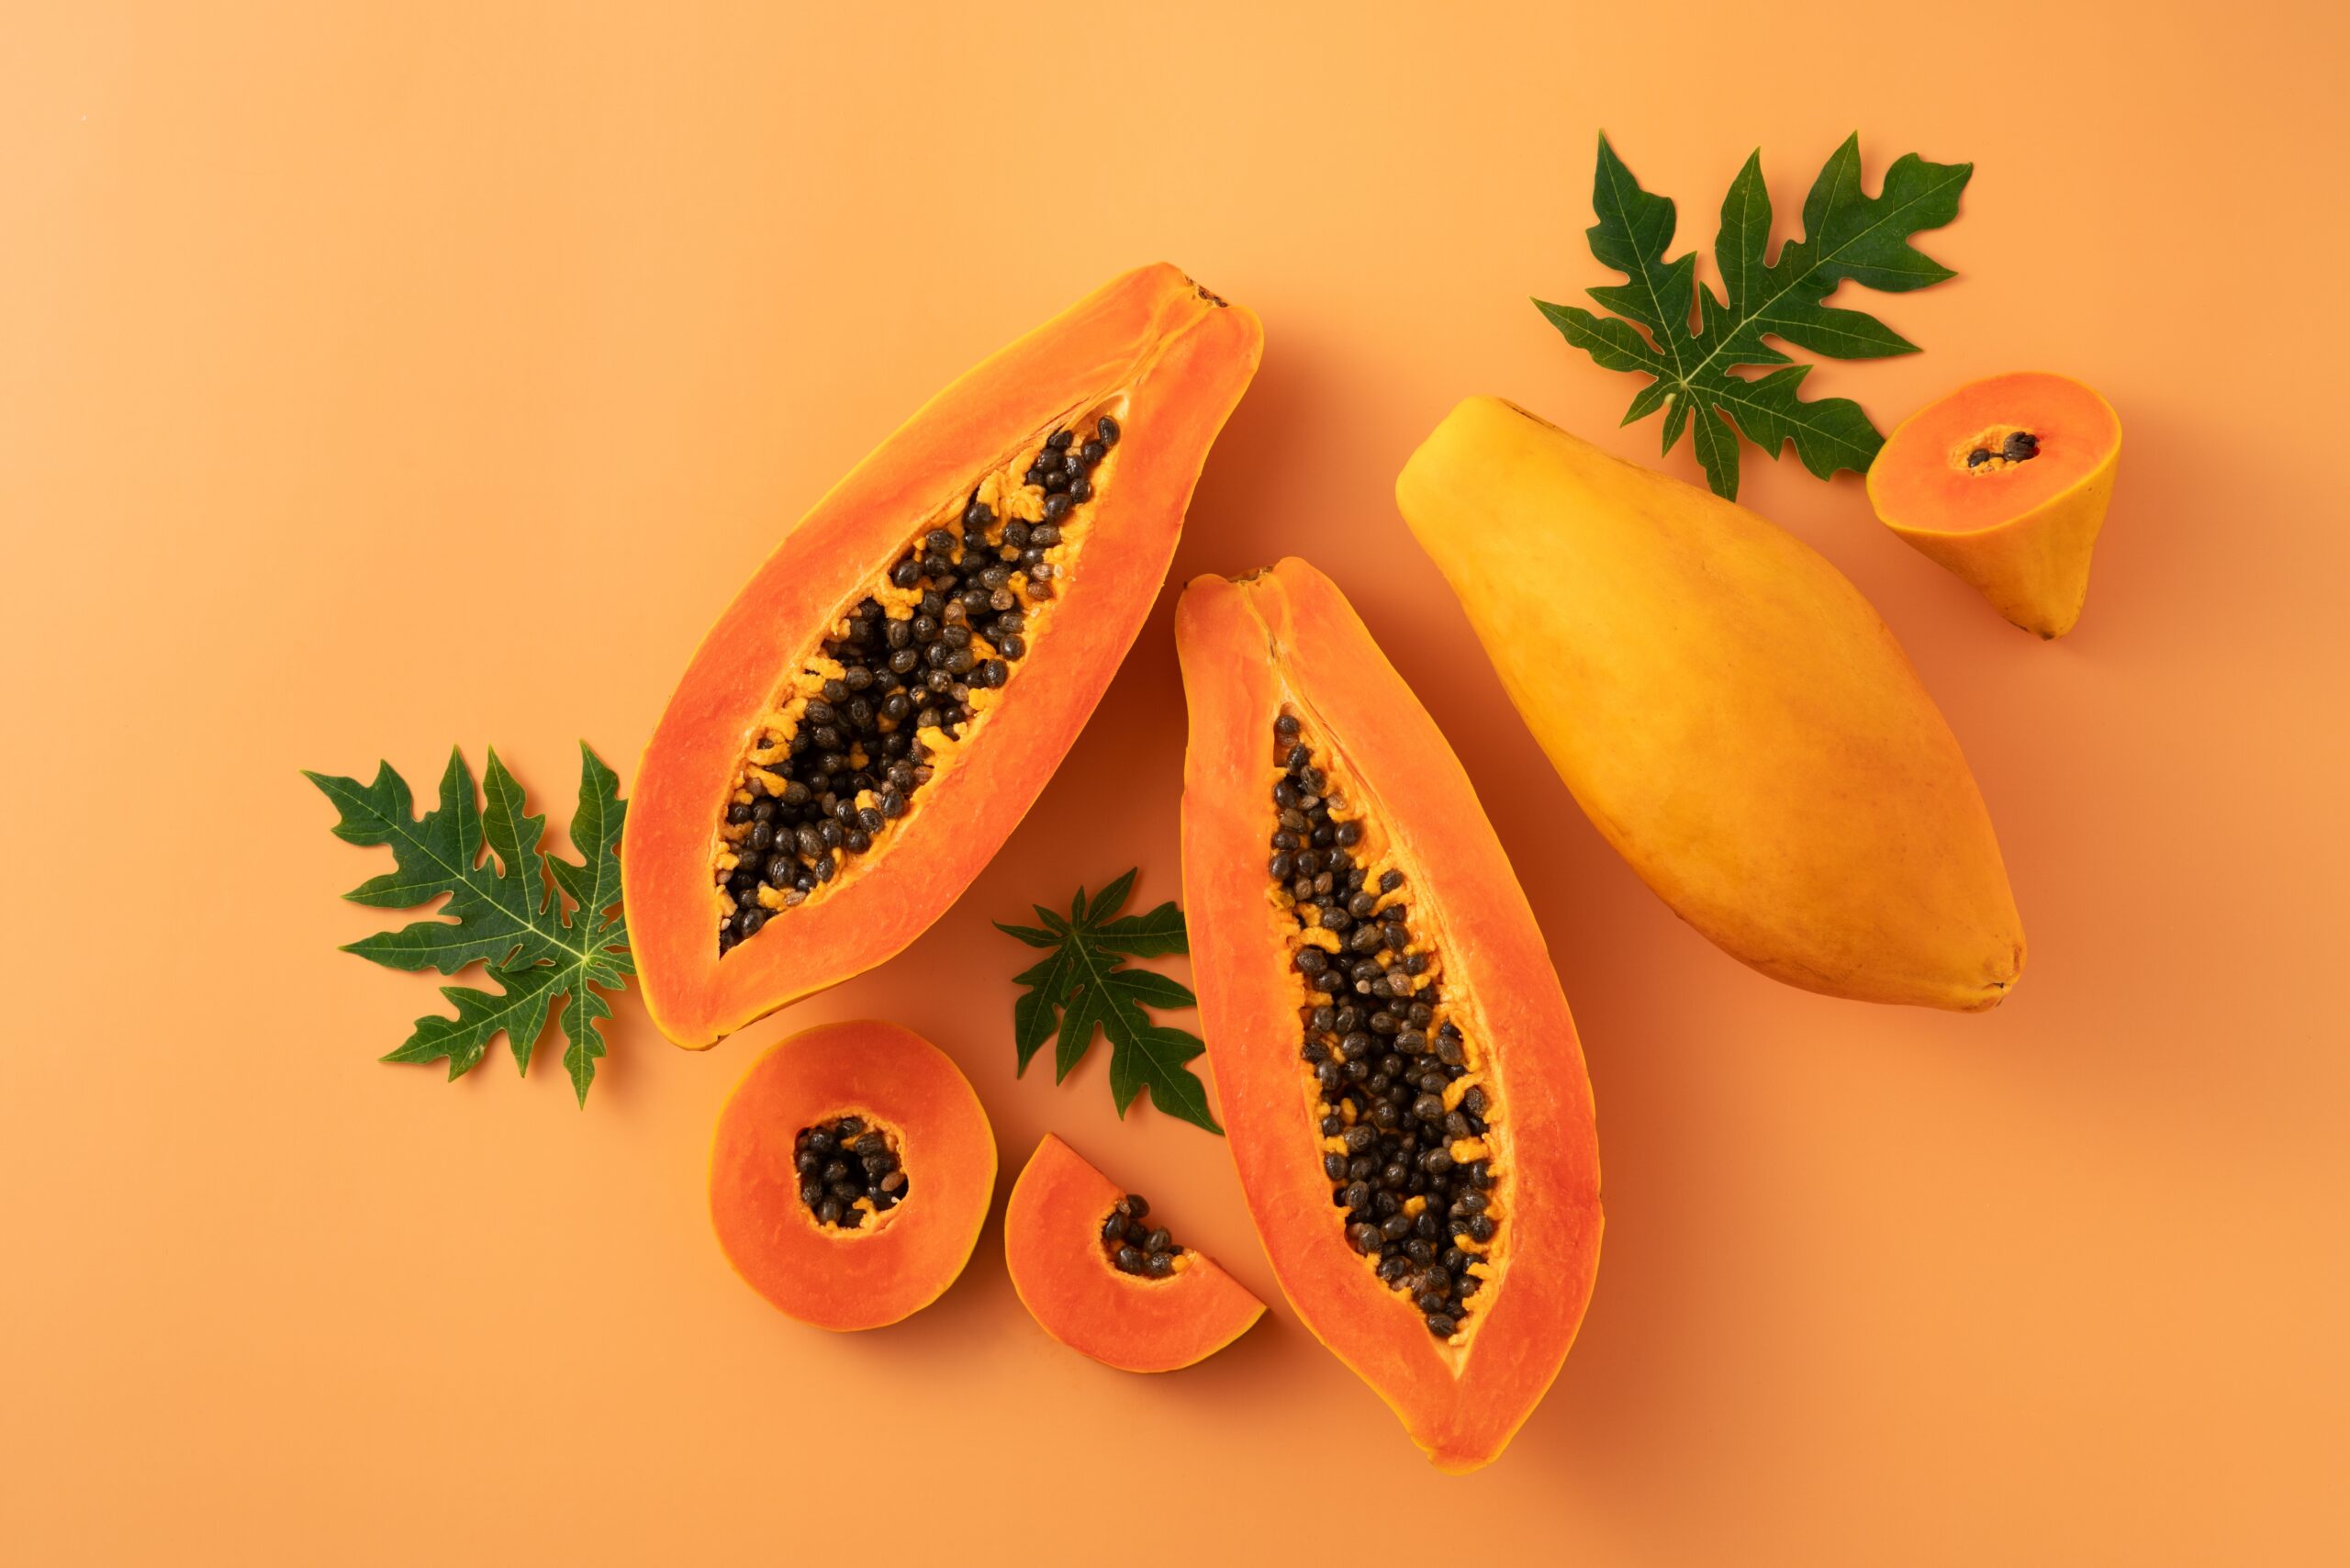 learn-about-the-benefits-of-papaya:-rich-in-vitamins-and-helps-metabolism